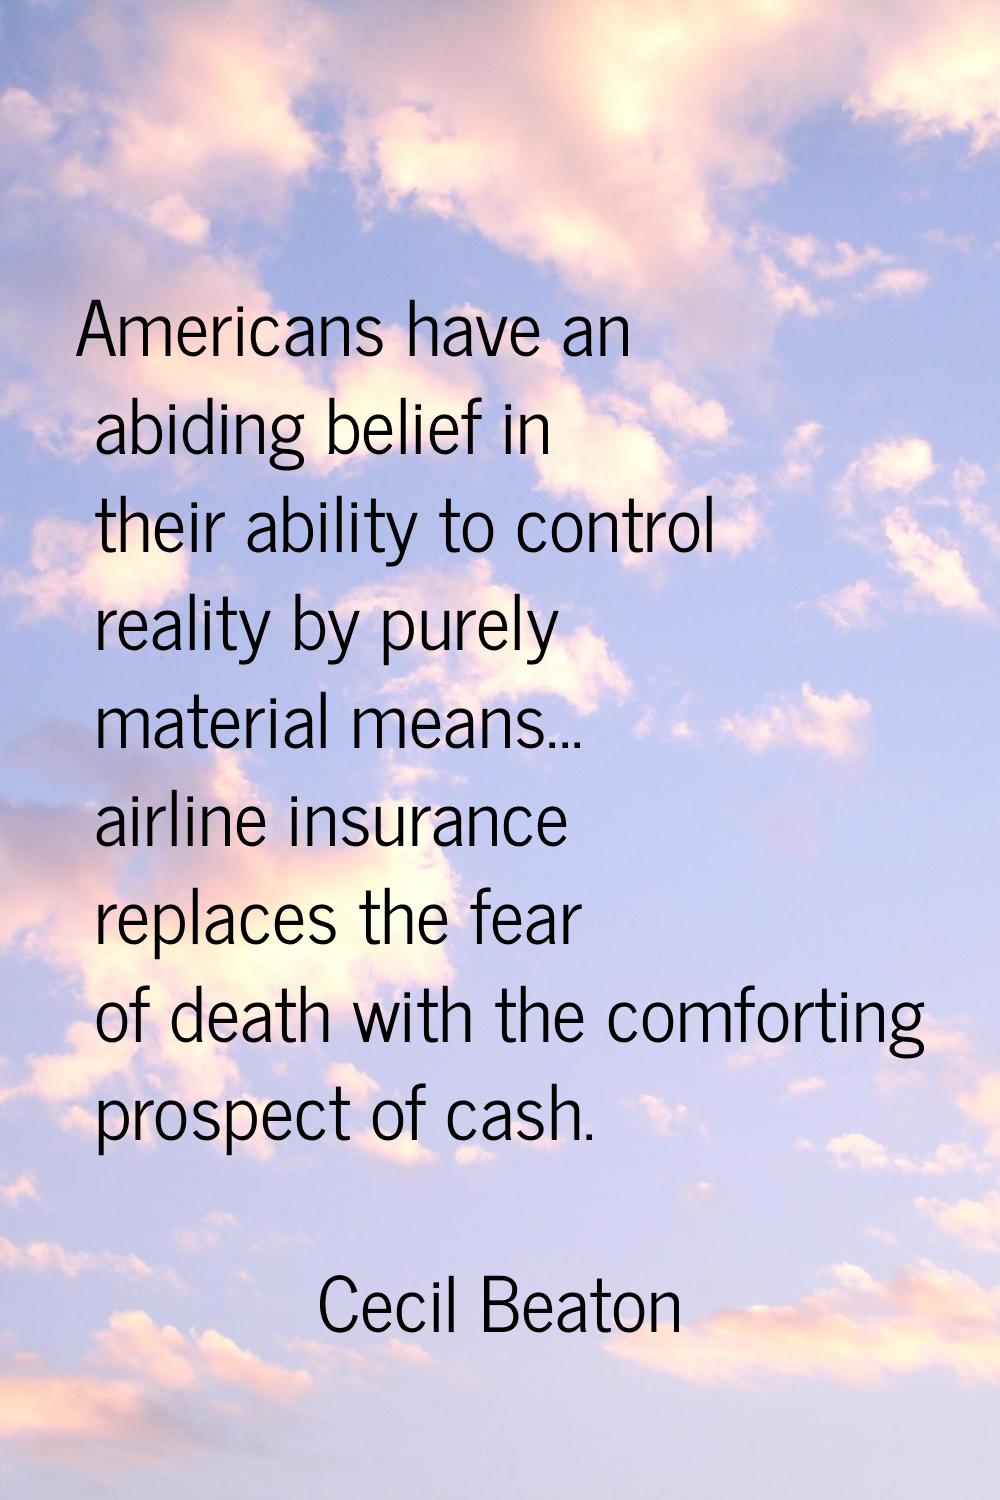 Americans have an abiding belief in their ability to control reality by purely material means... ai